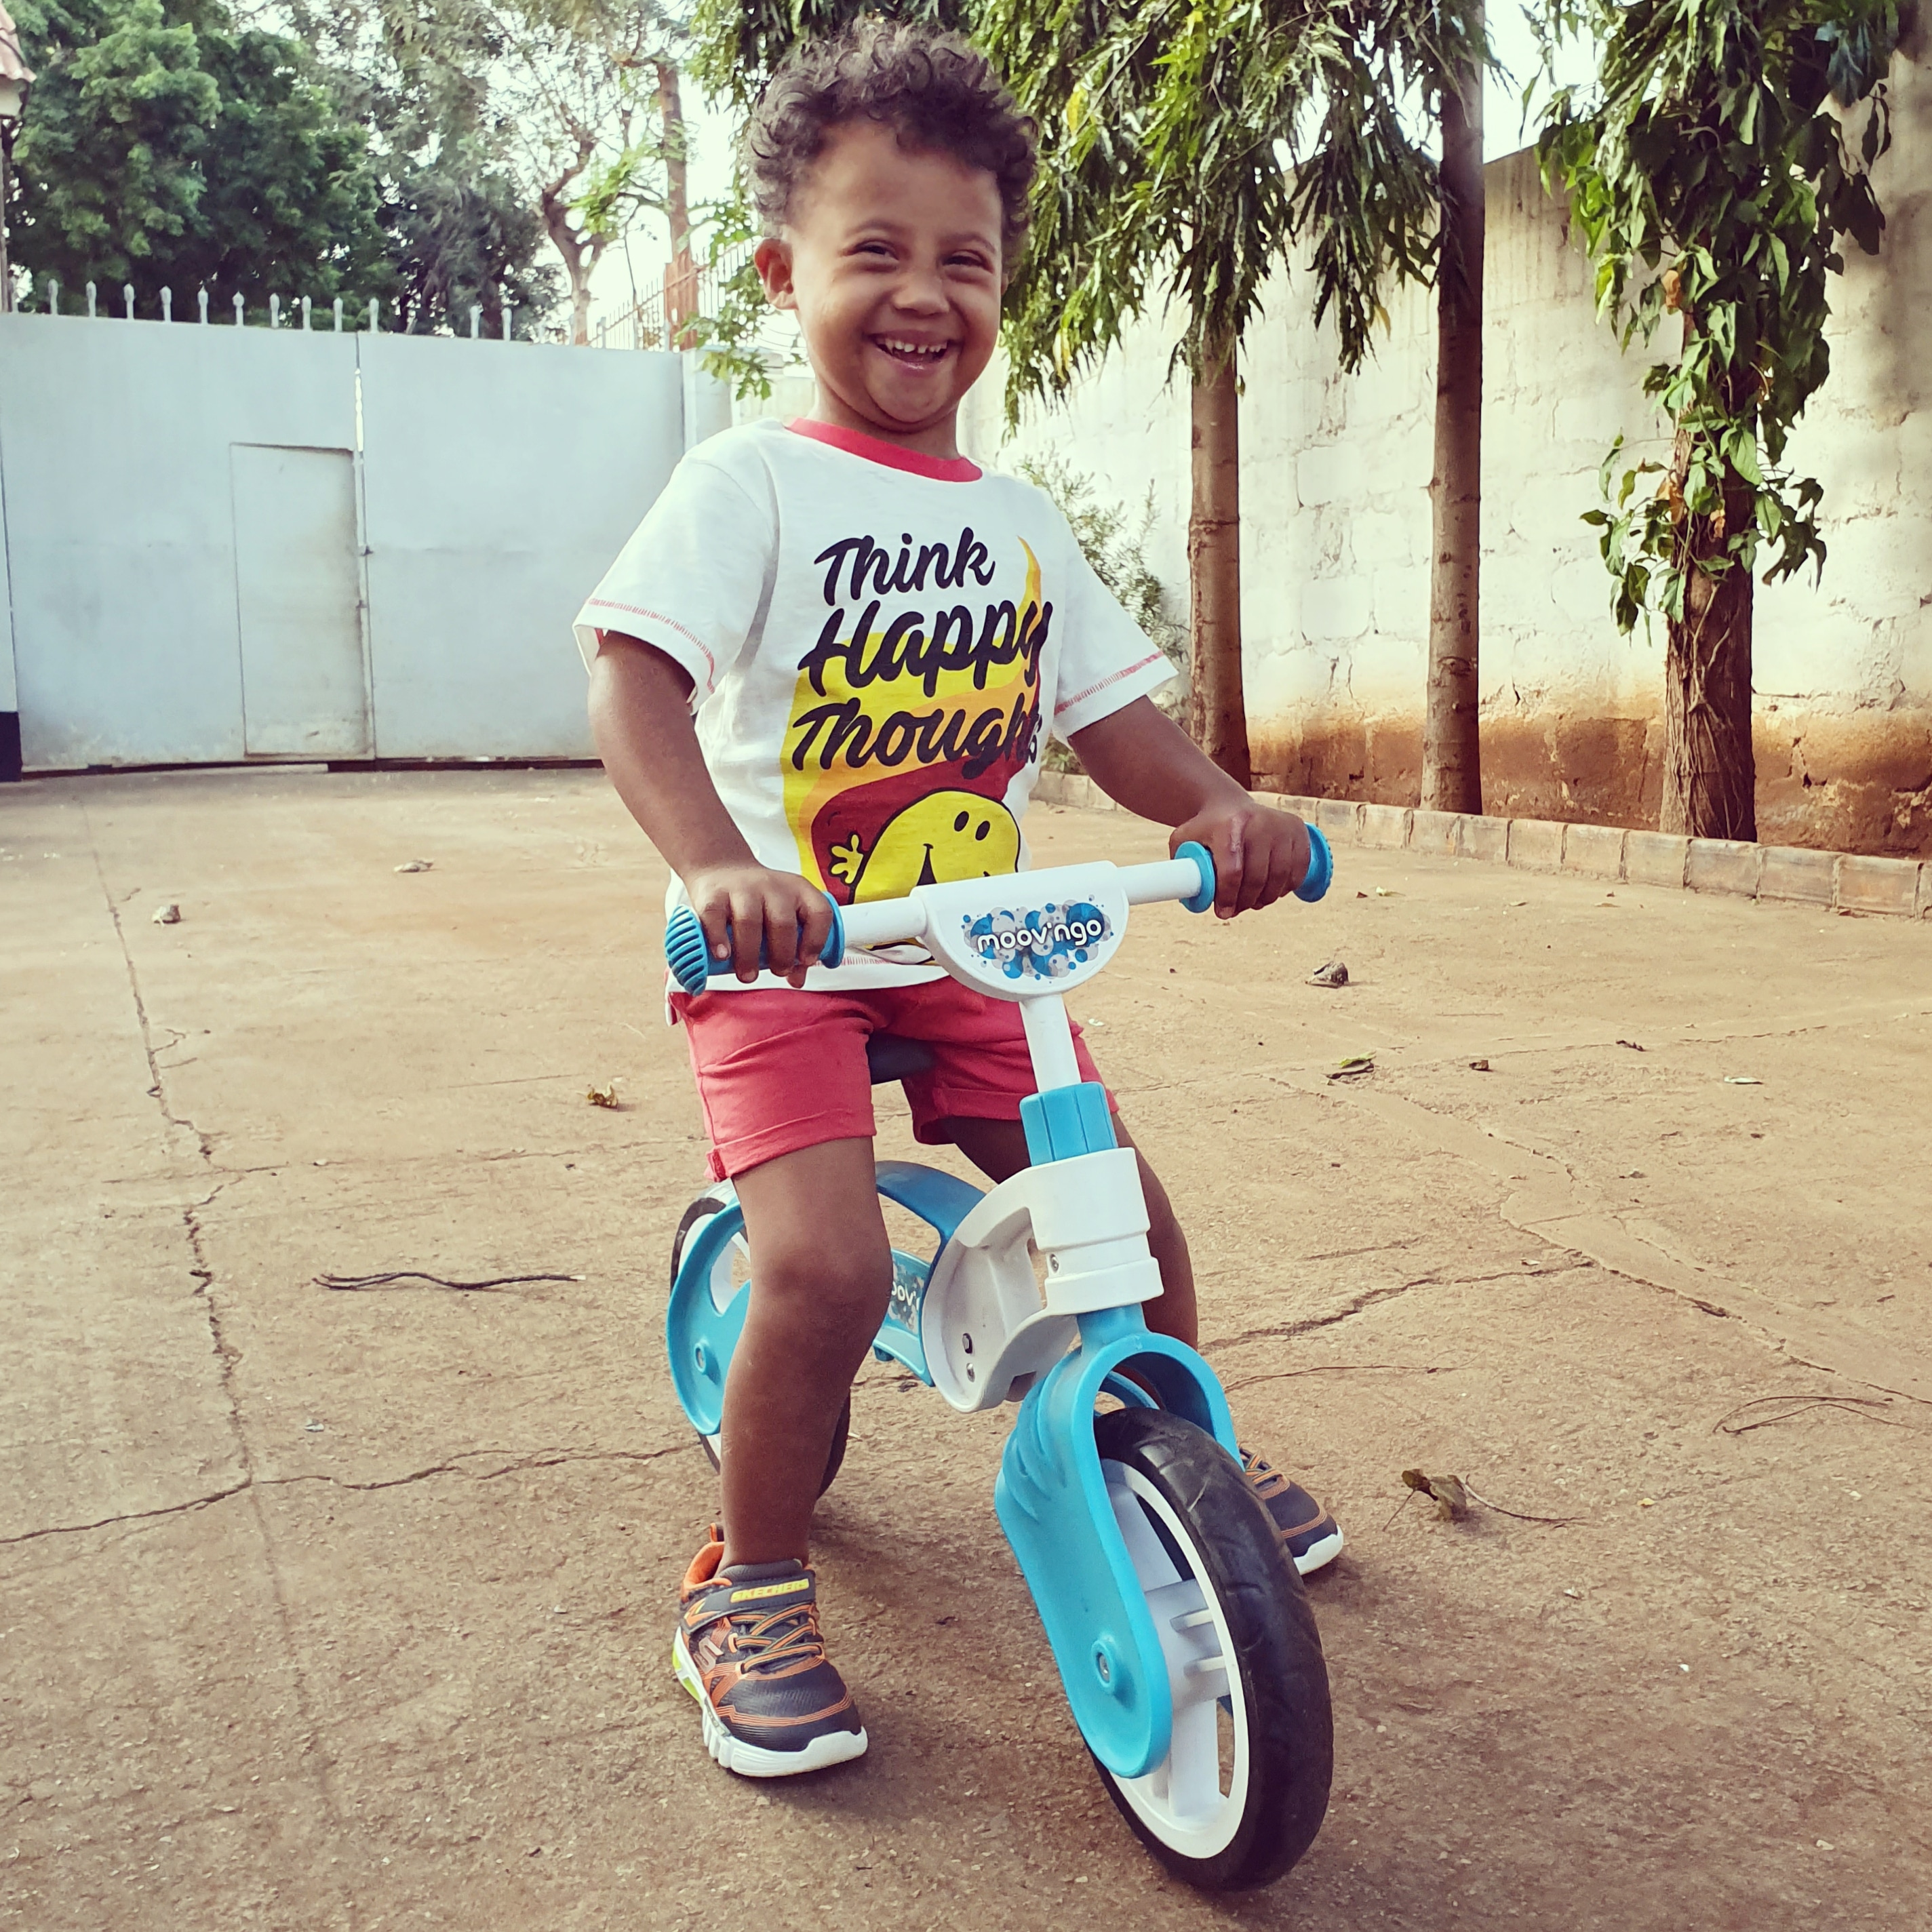 Hayley's son riding a tricycle.